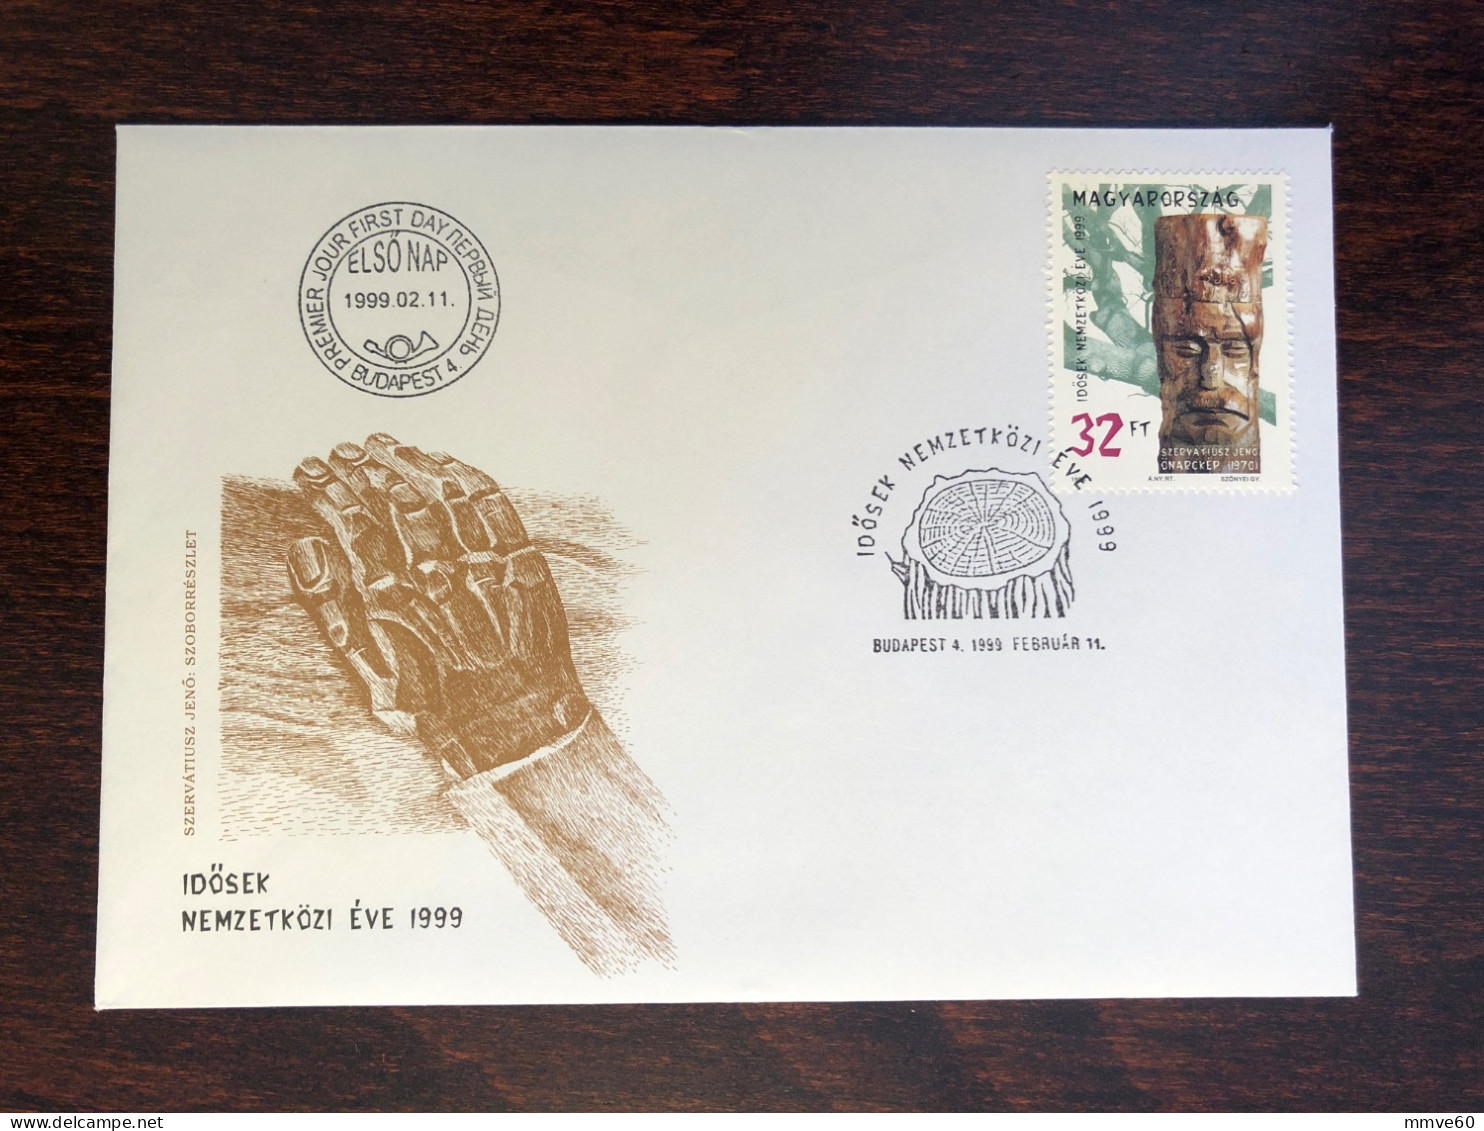 HUNGARY FDC COVER 1999 YEAR GERONTOLOGY HEALTH MEDICINE STAMPS - FDC